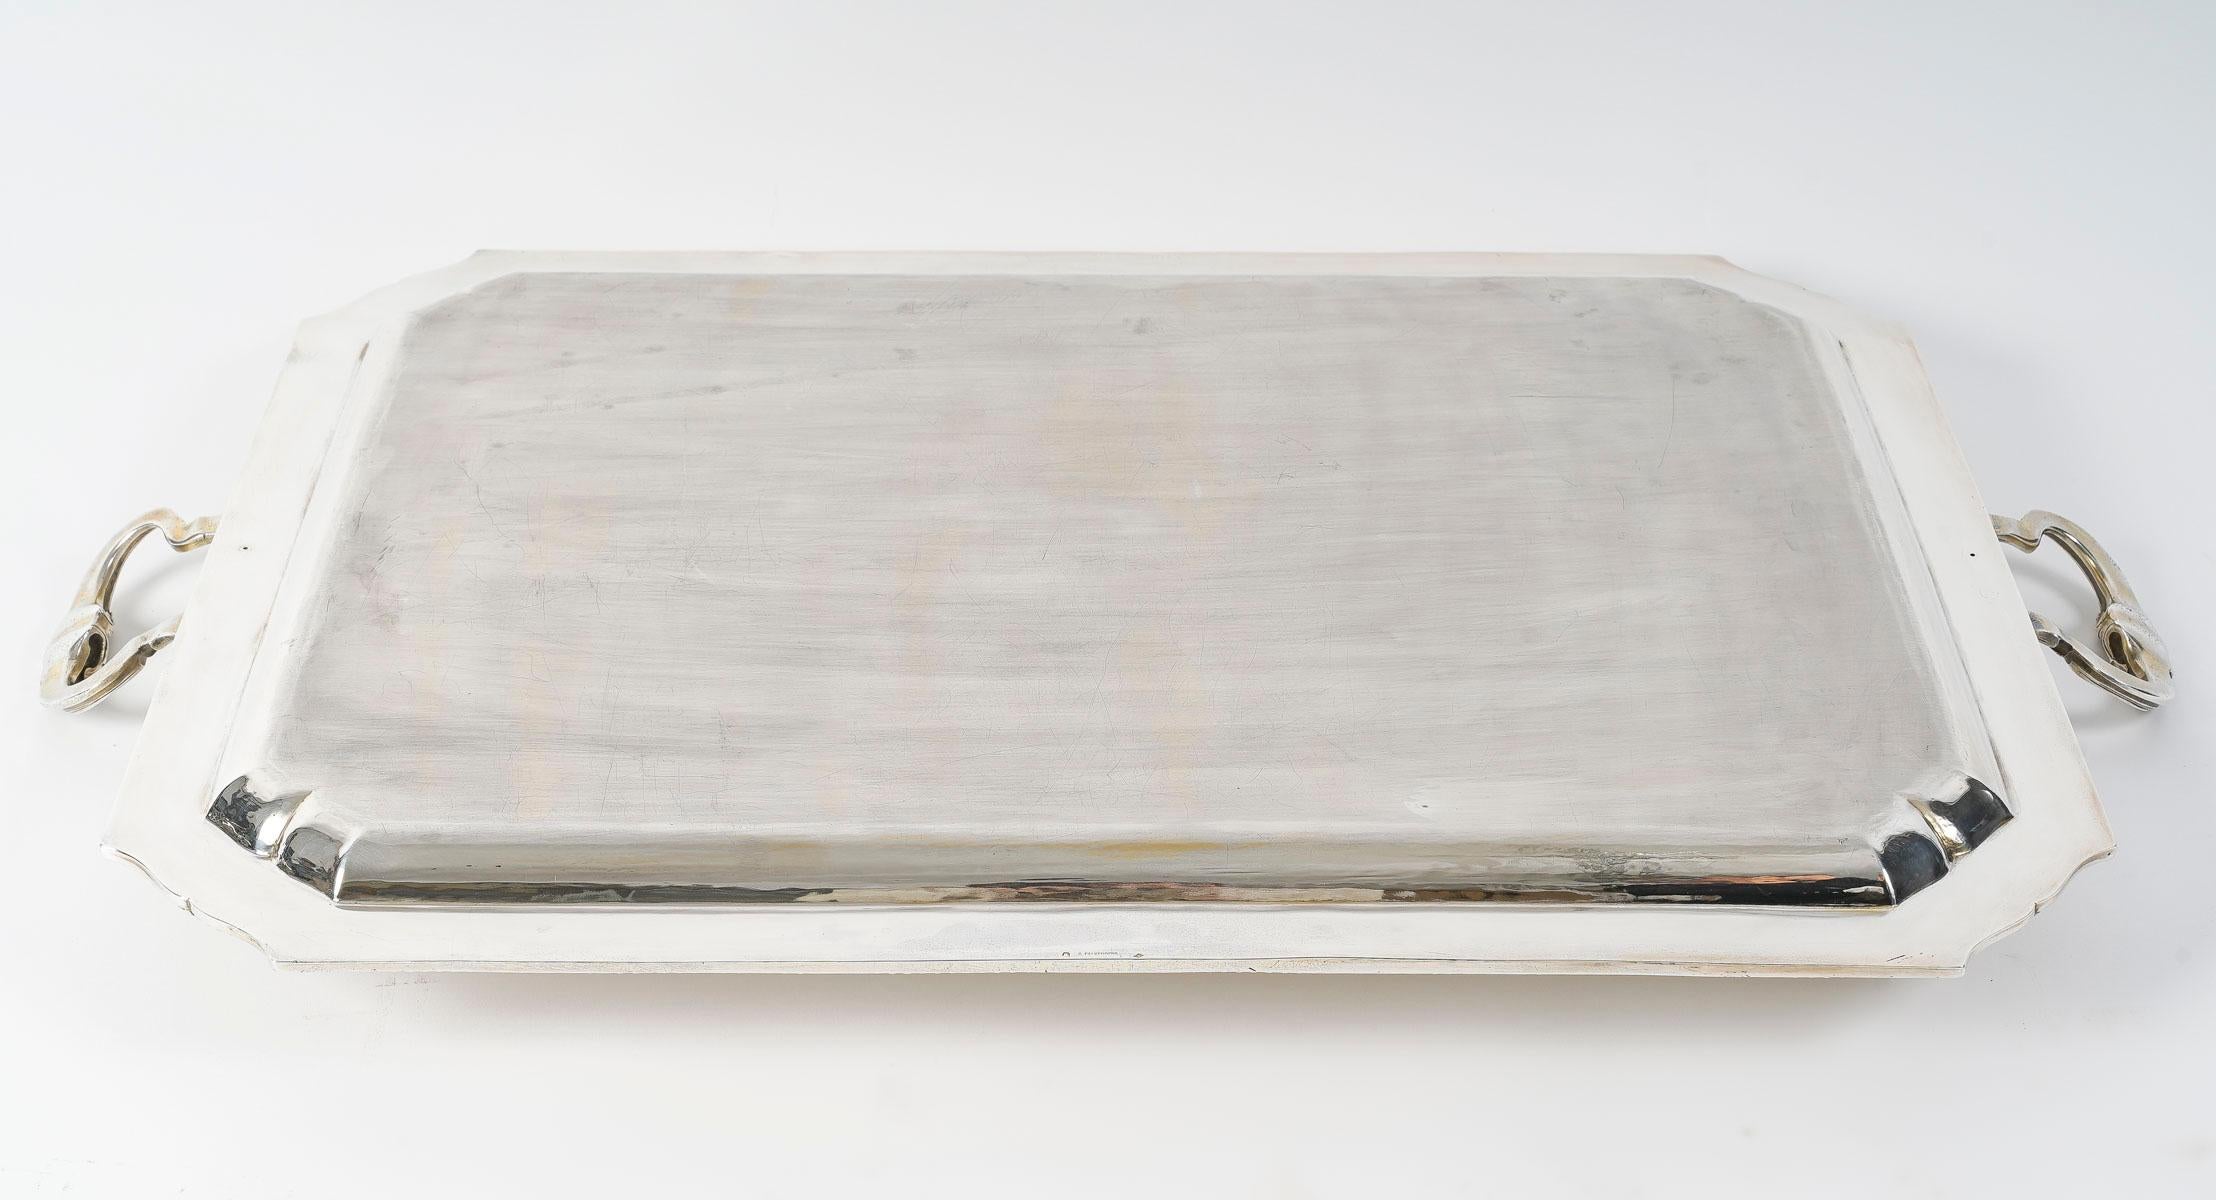 Orfèvre Falkenberg - Rectangular Tray In Sterling Silver - Early 20th Century For Sale 8